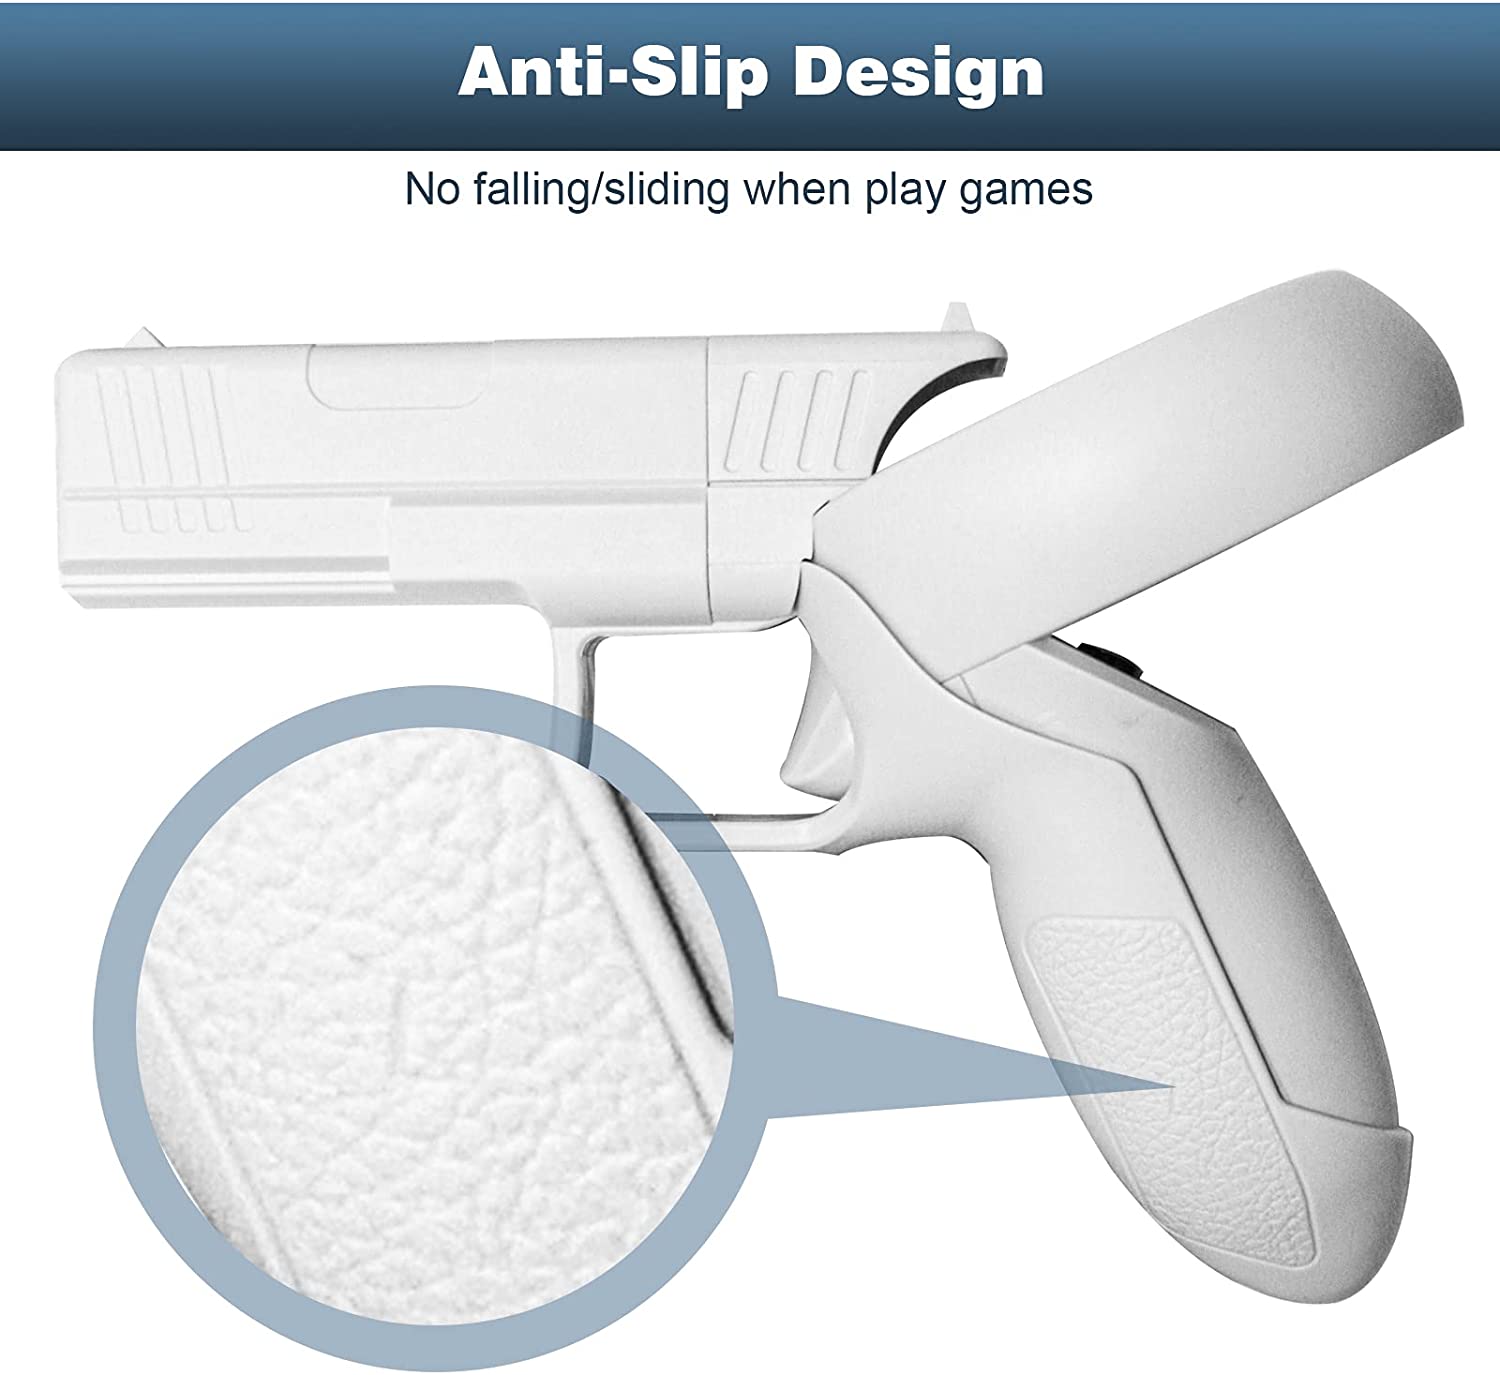 This Grip Cover features an anti-slip design, providing protection against slipping while gaming.